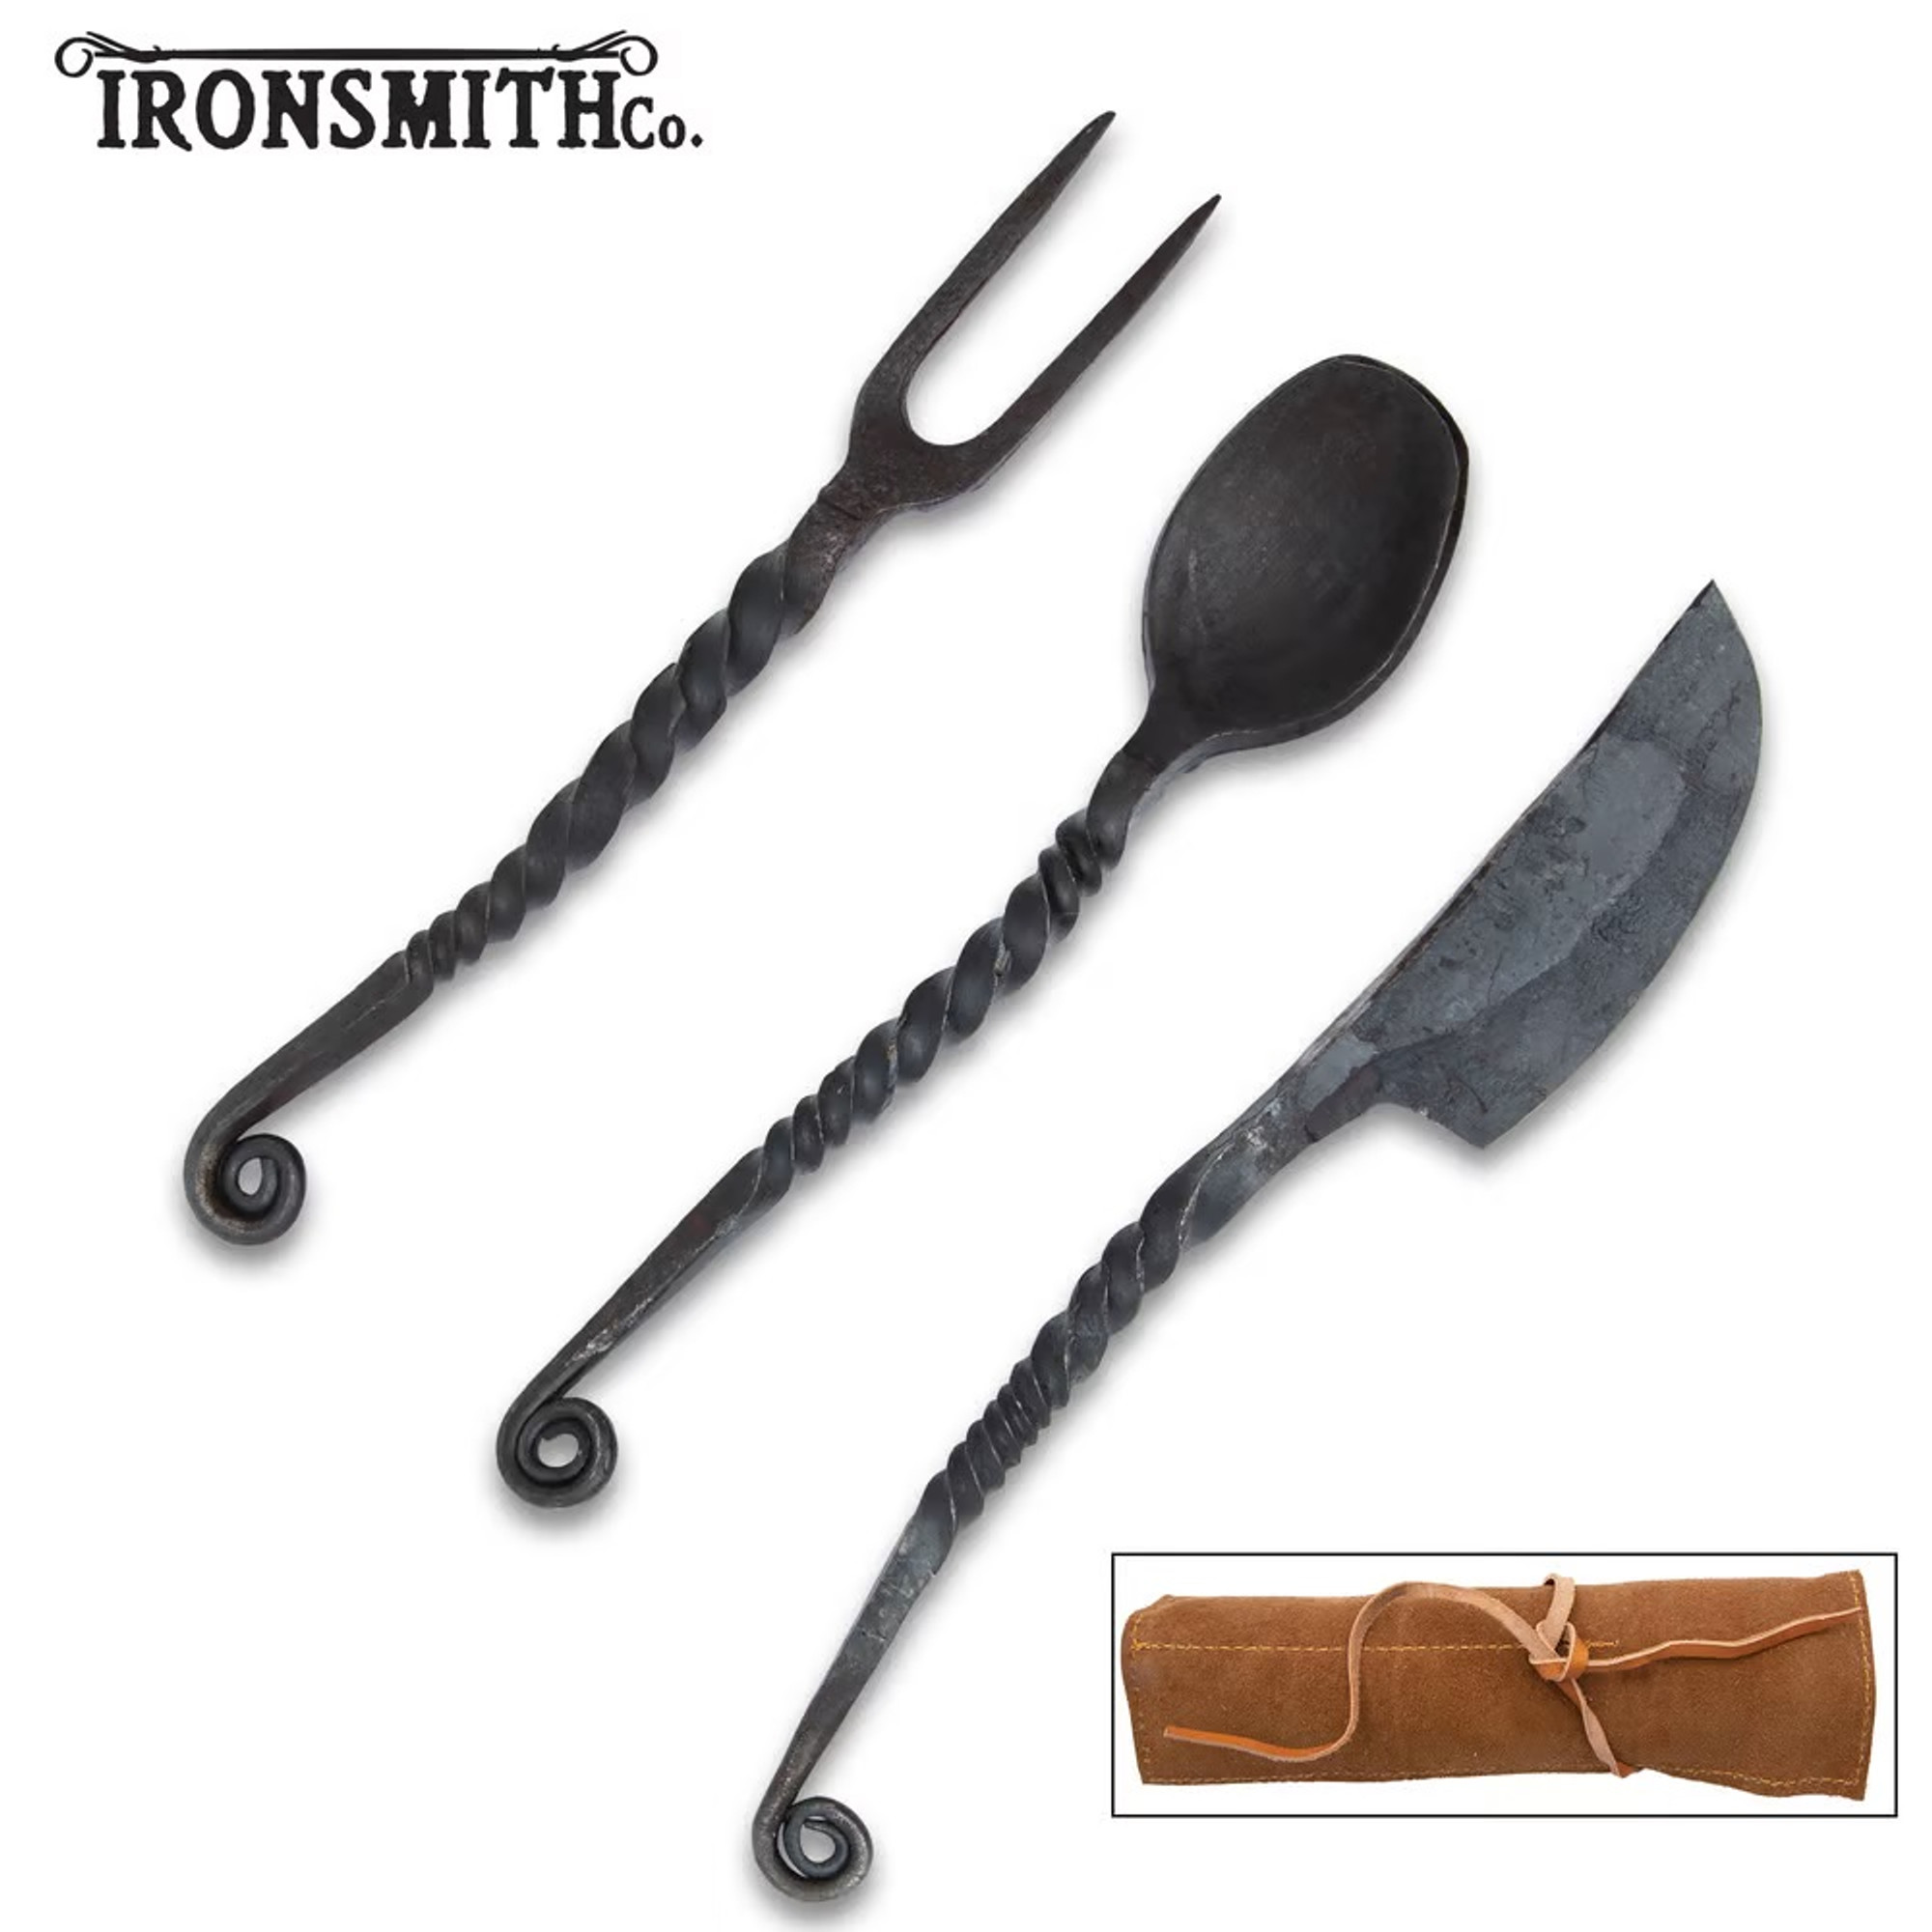 Ironsmith Co. Medieval Dining Set & Pouch